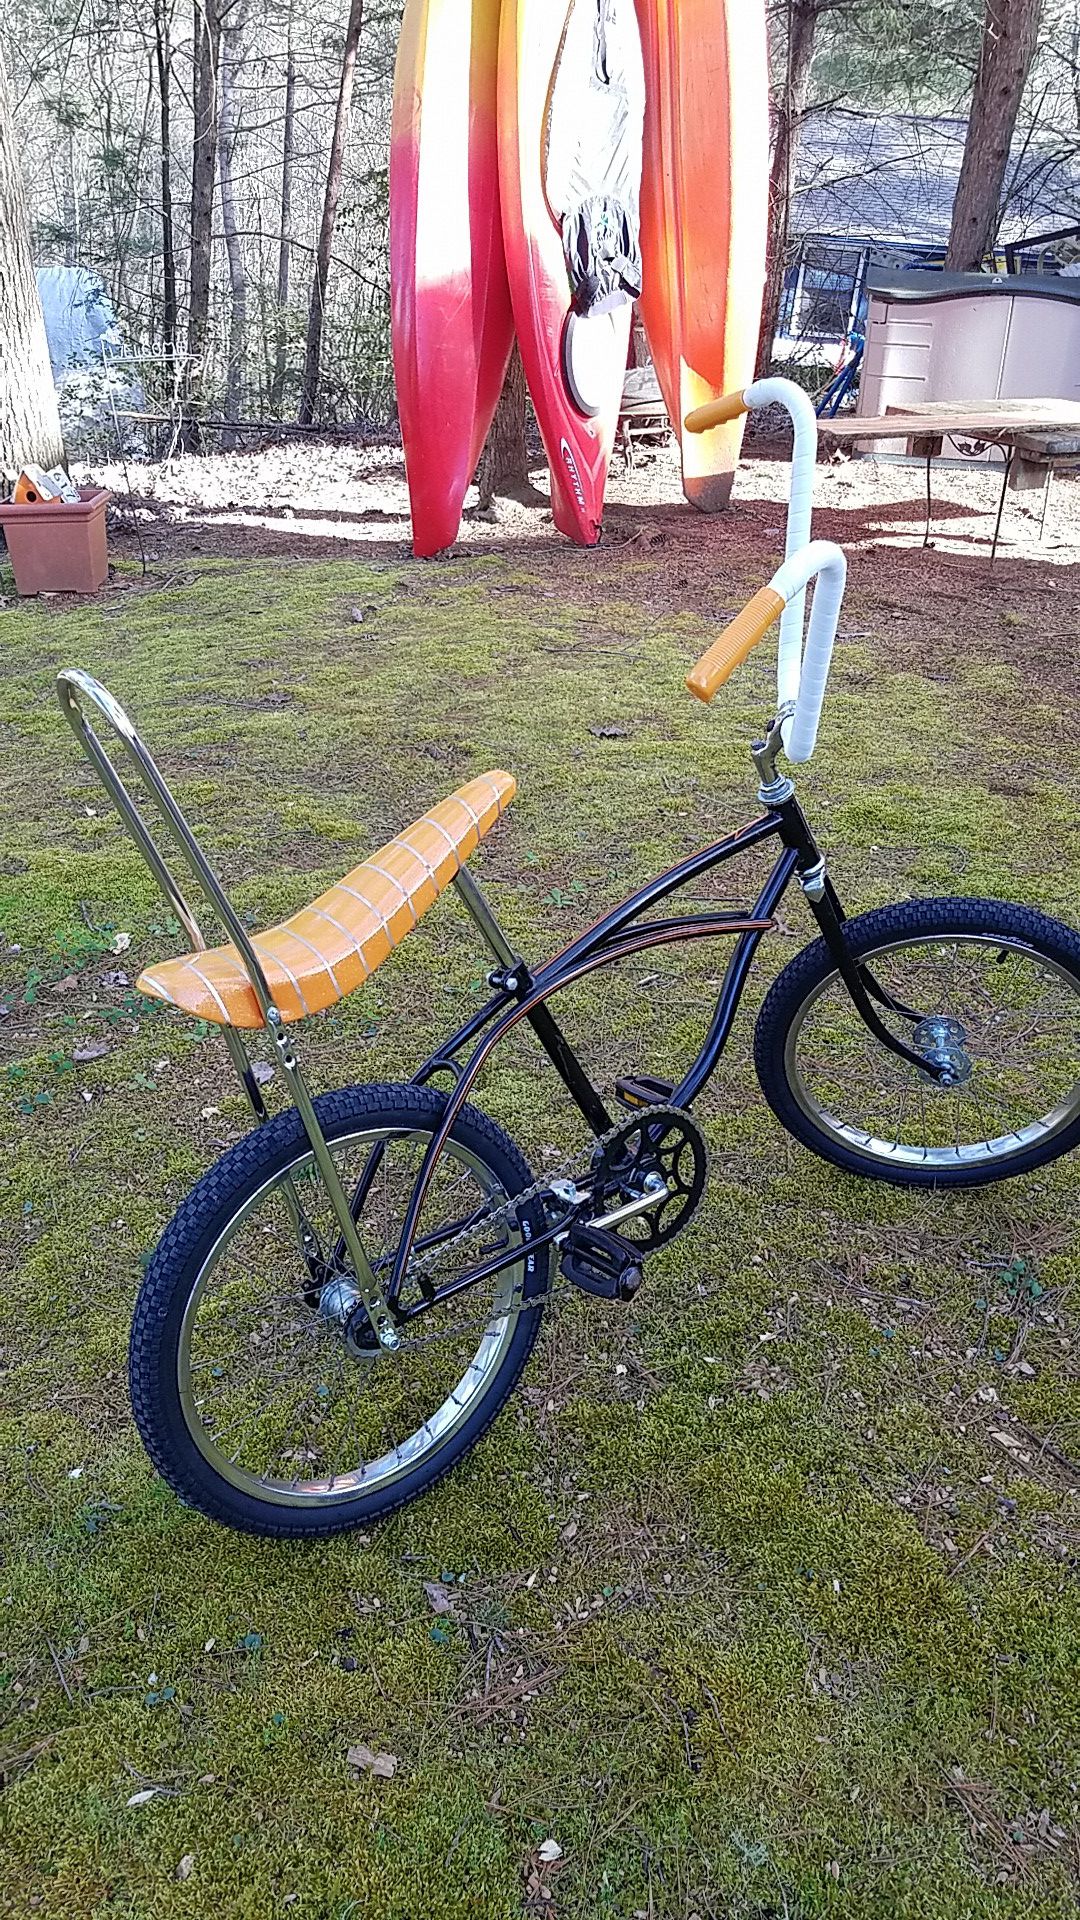 Low Rider Bicycle new build. What the cool kids ride!